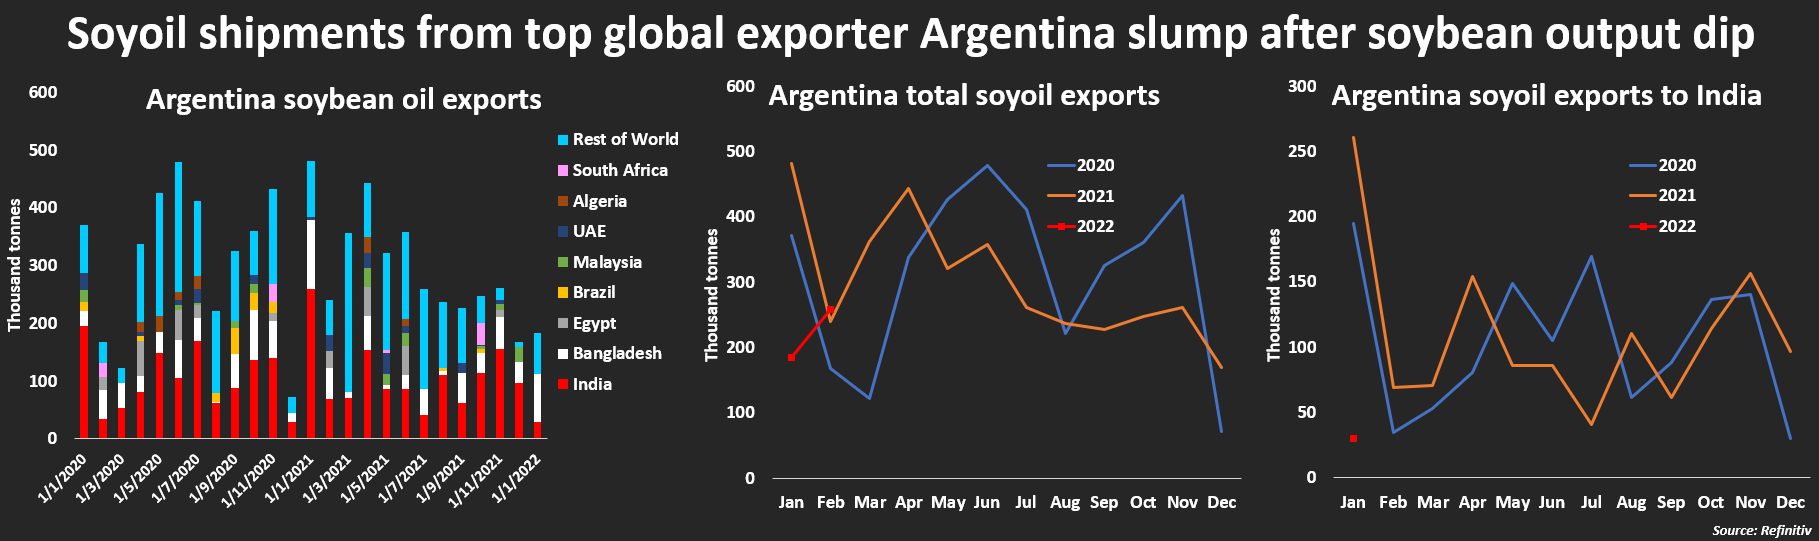 Soyoil shipments from top global exporter Argentina slump after soybean output dip